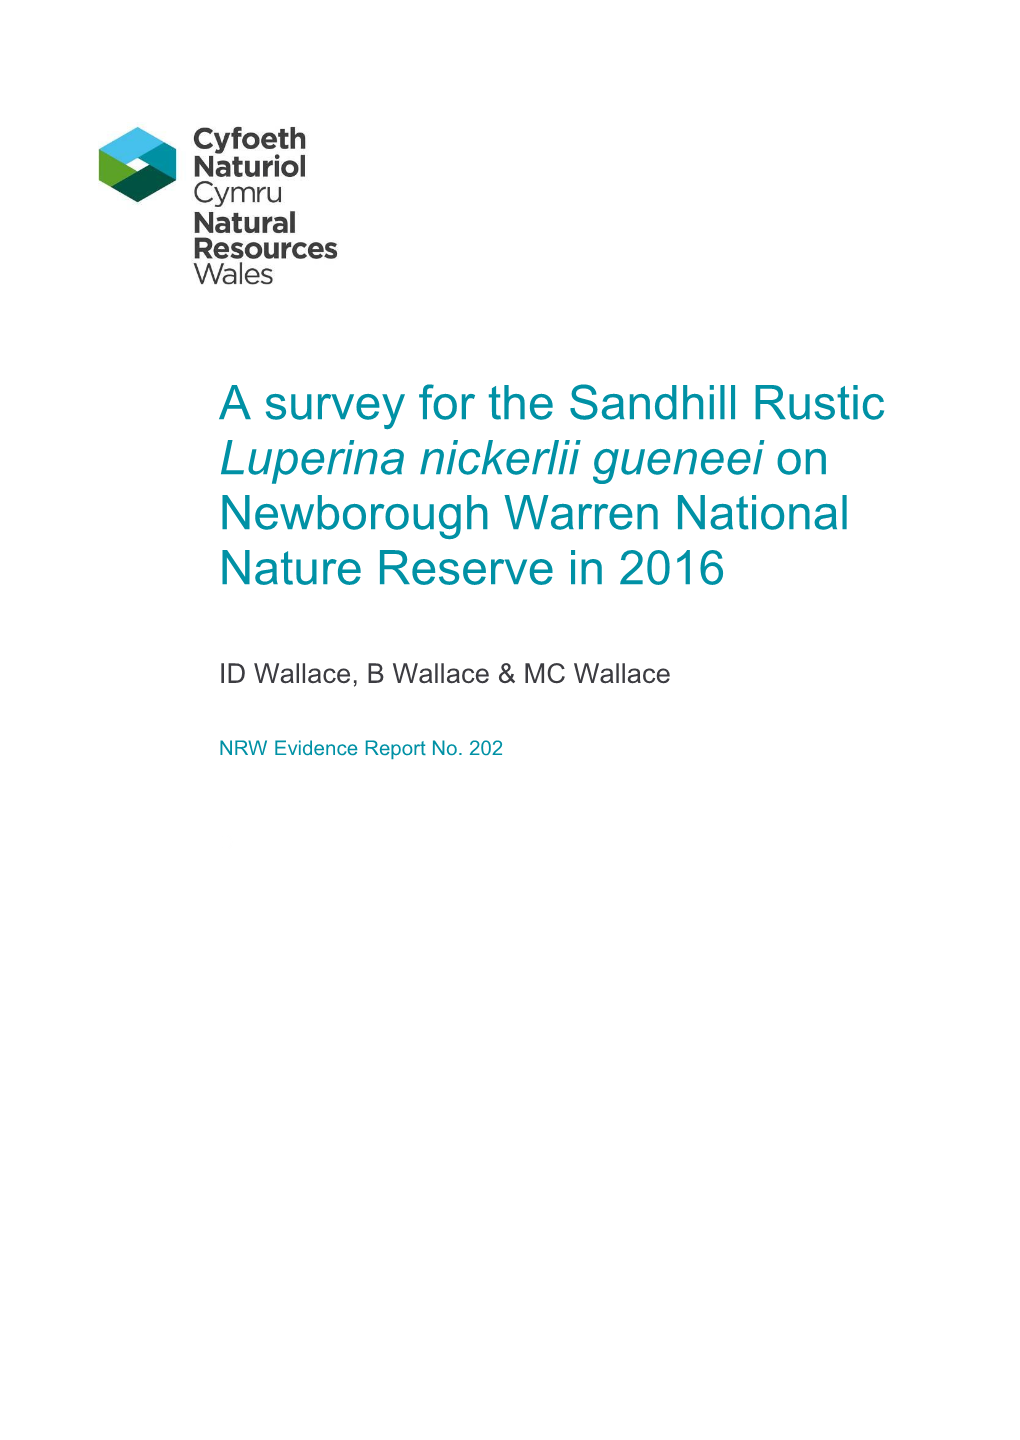 A Survey for the Sandhill Rustic Luperina Nickerlii Gueneei on Newborough Warren National Nature Reserve in 2016